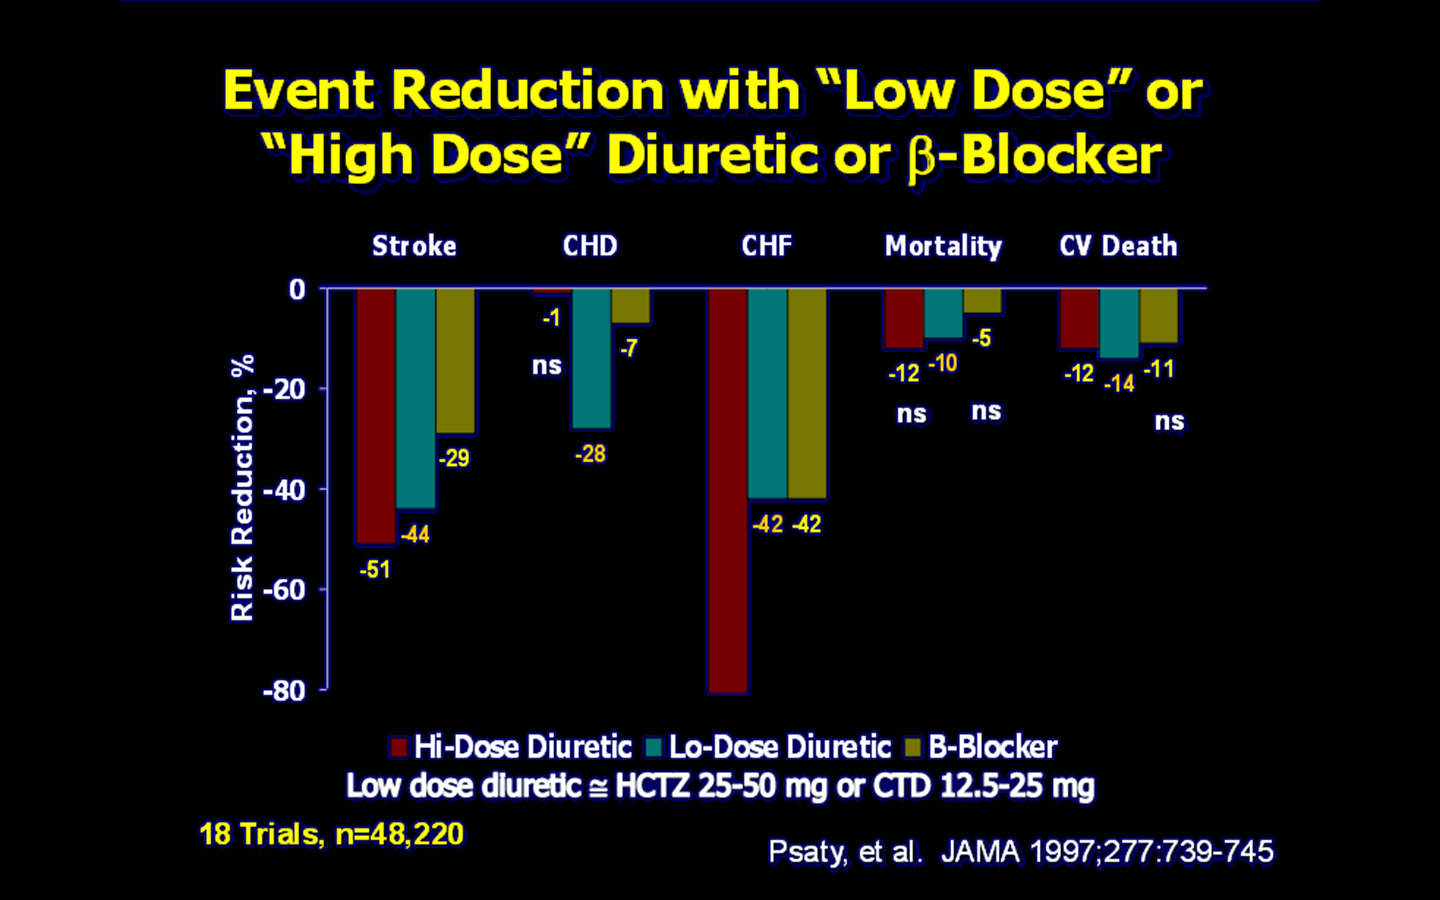 EVENT REDUCTION WITH LOW DOSE